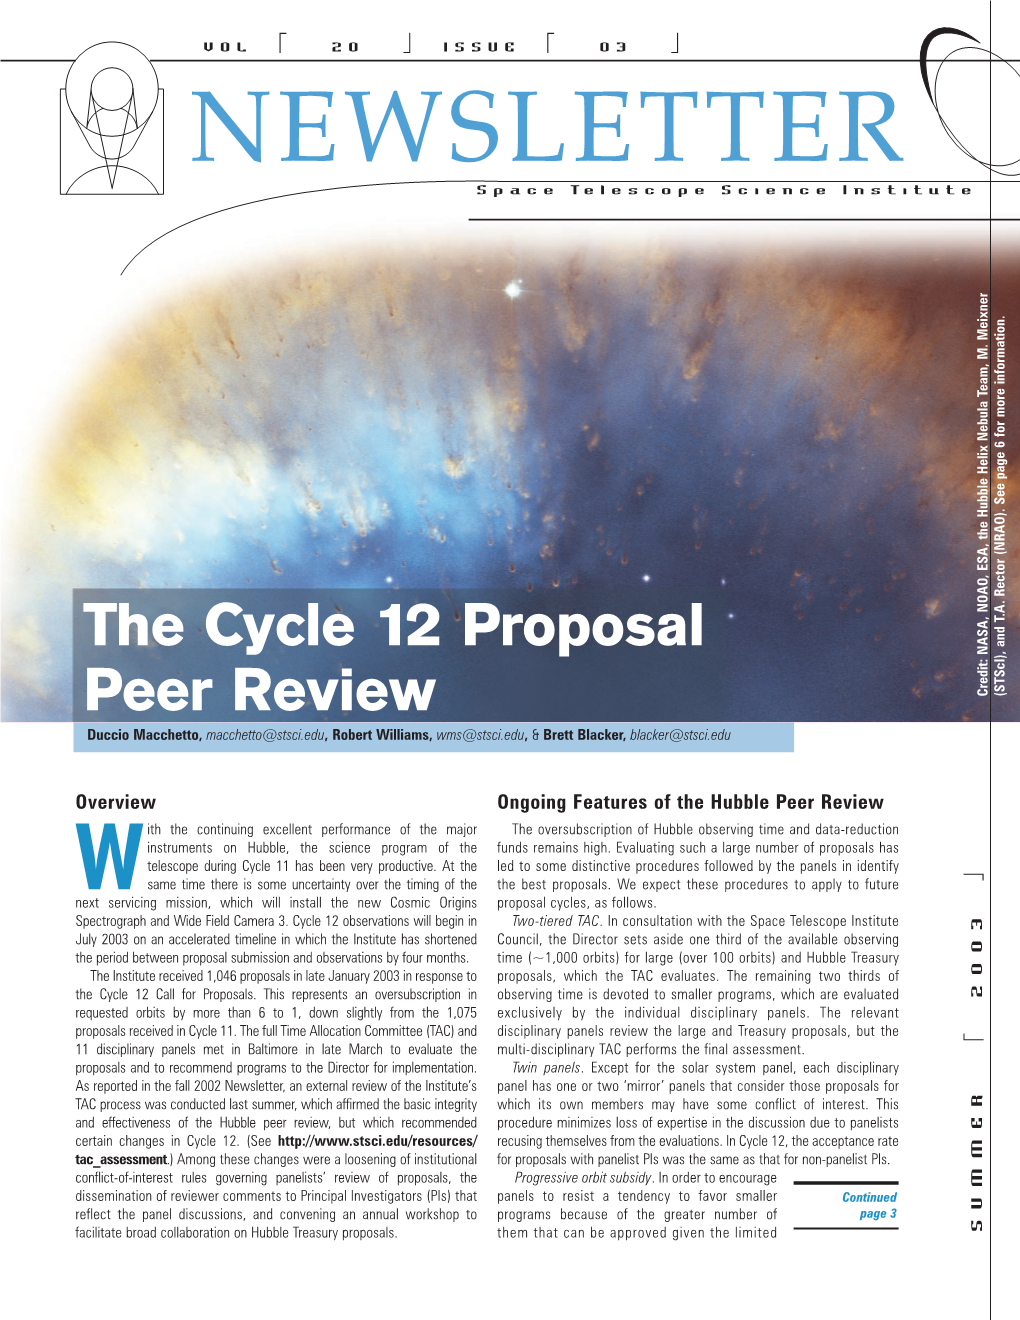 The Cycle 12 Proposal Peer Review